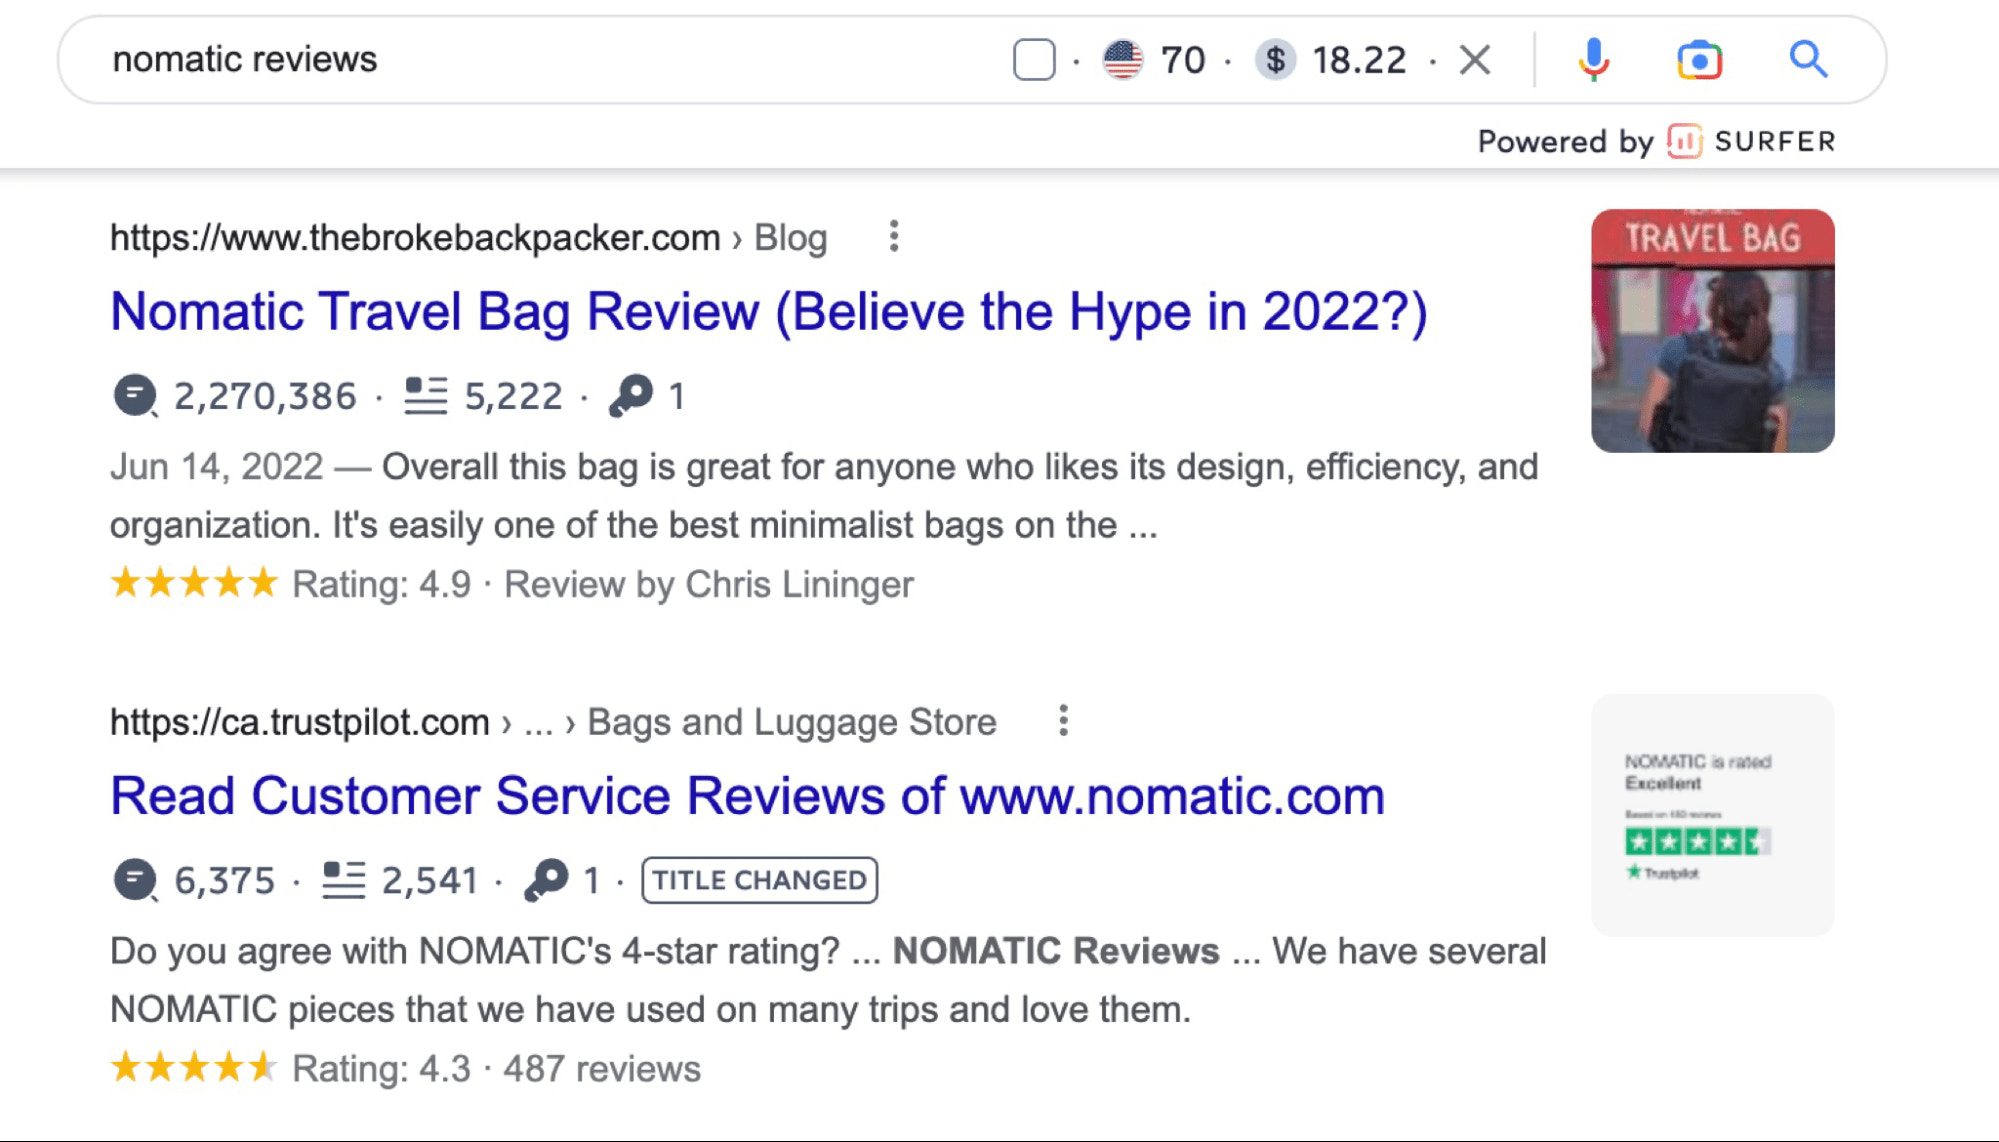 A screenshot of Nomatic's Trust Pilot reviews in Google search results.